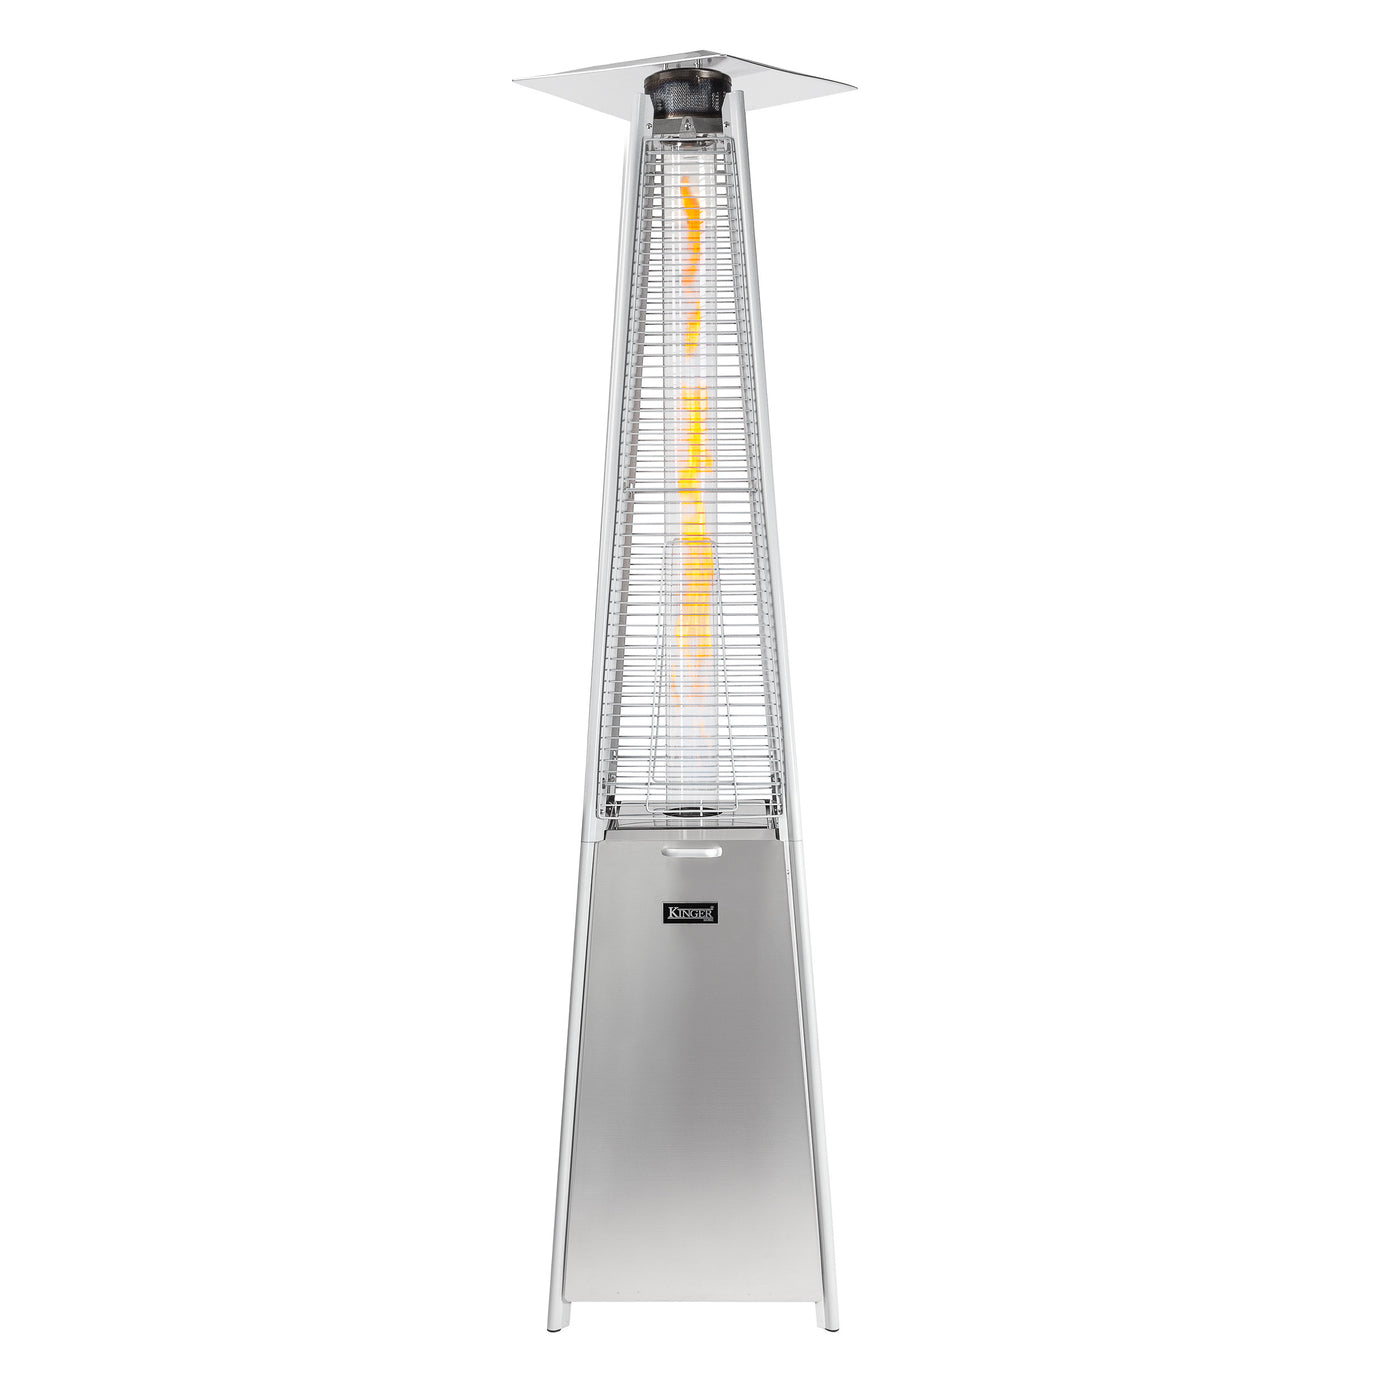 Pyramid Outdoor Propane Patio Heater, Multiple Colors